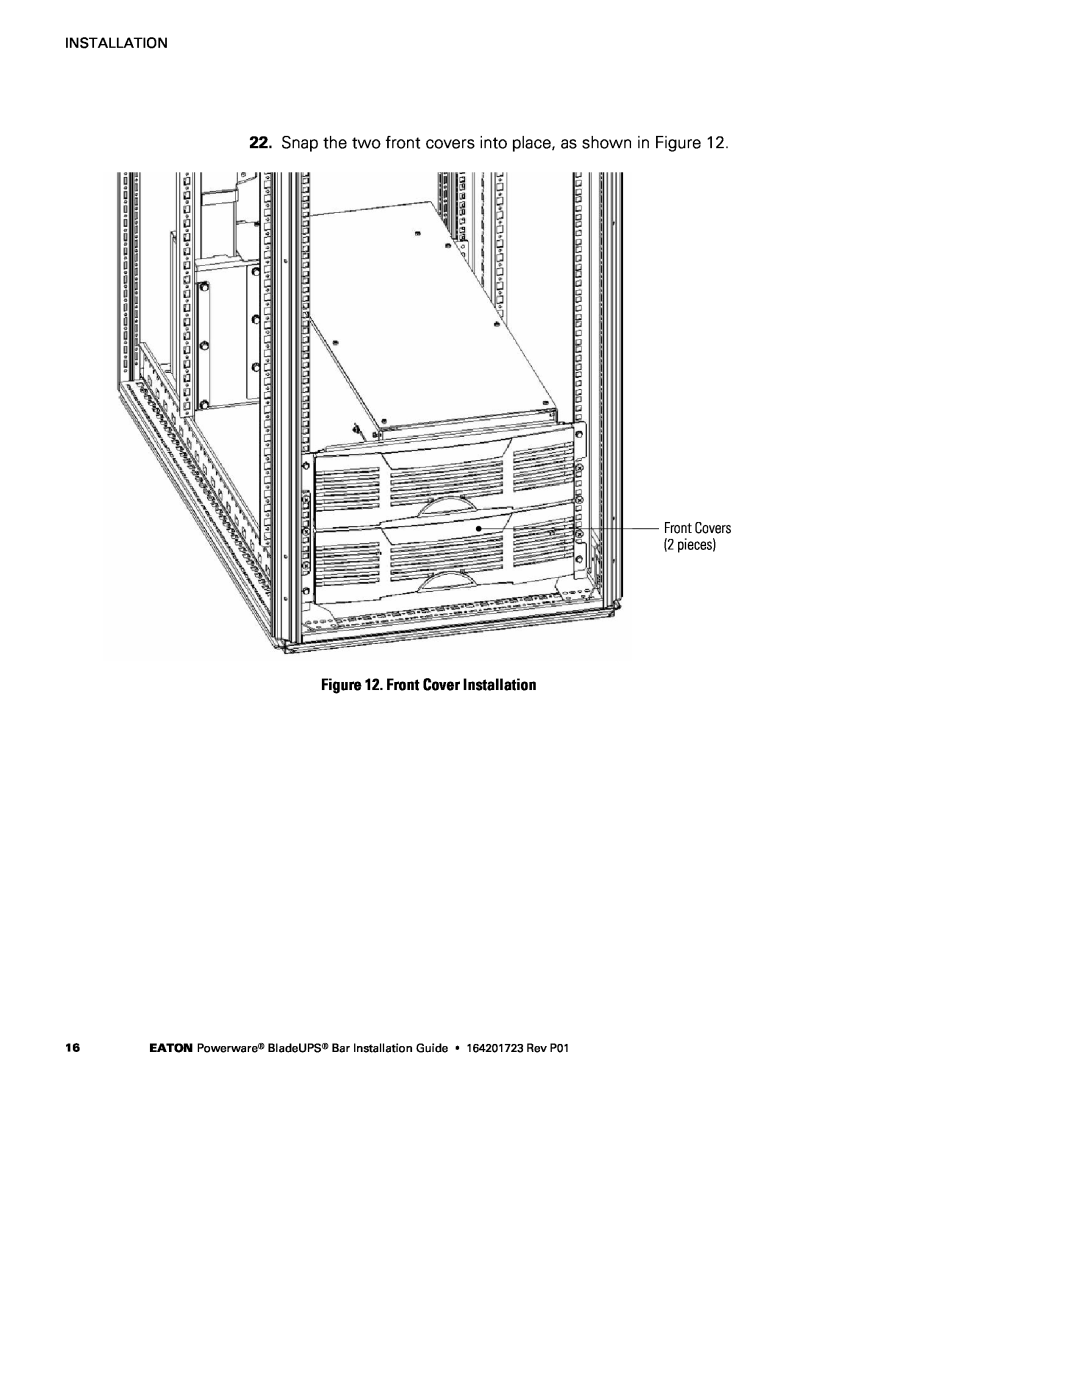 Eaton Electrical BladeUPS Bar manual Snap the two front covers into place, as shown in Figure, Front Cover Installation 